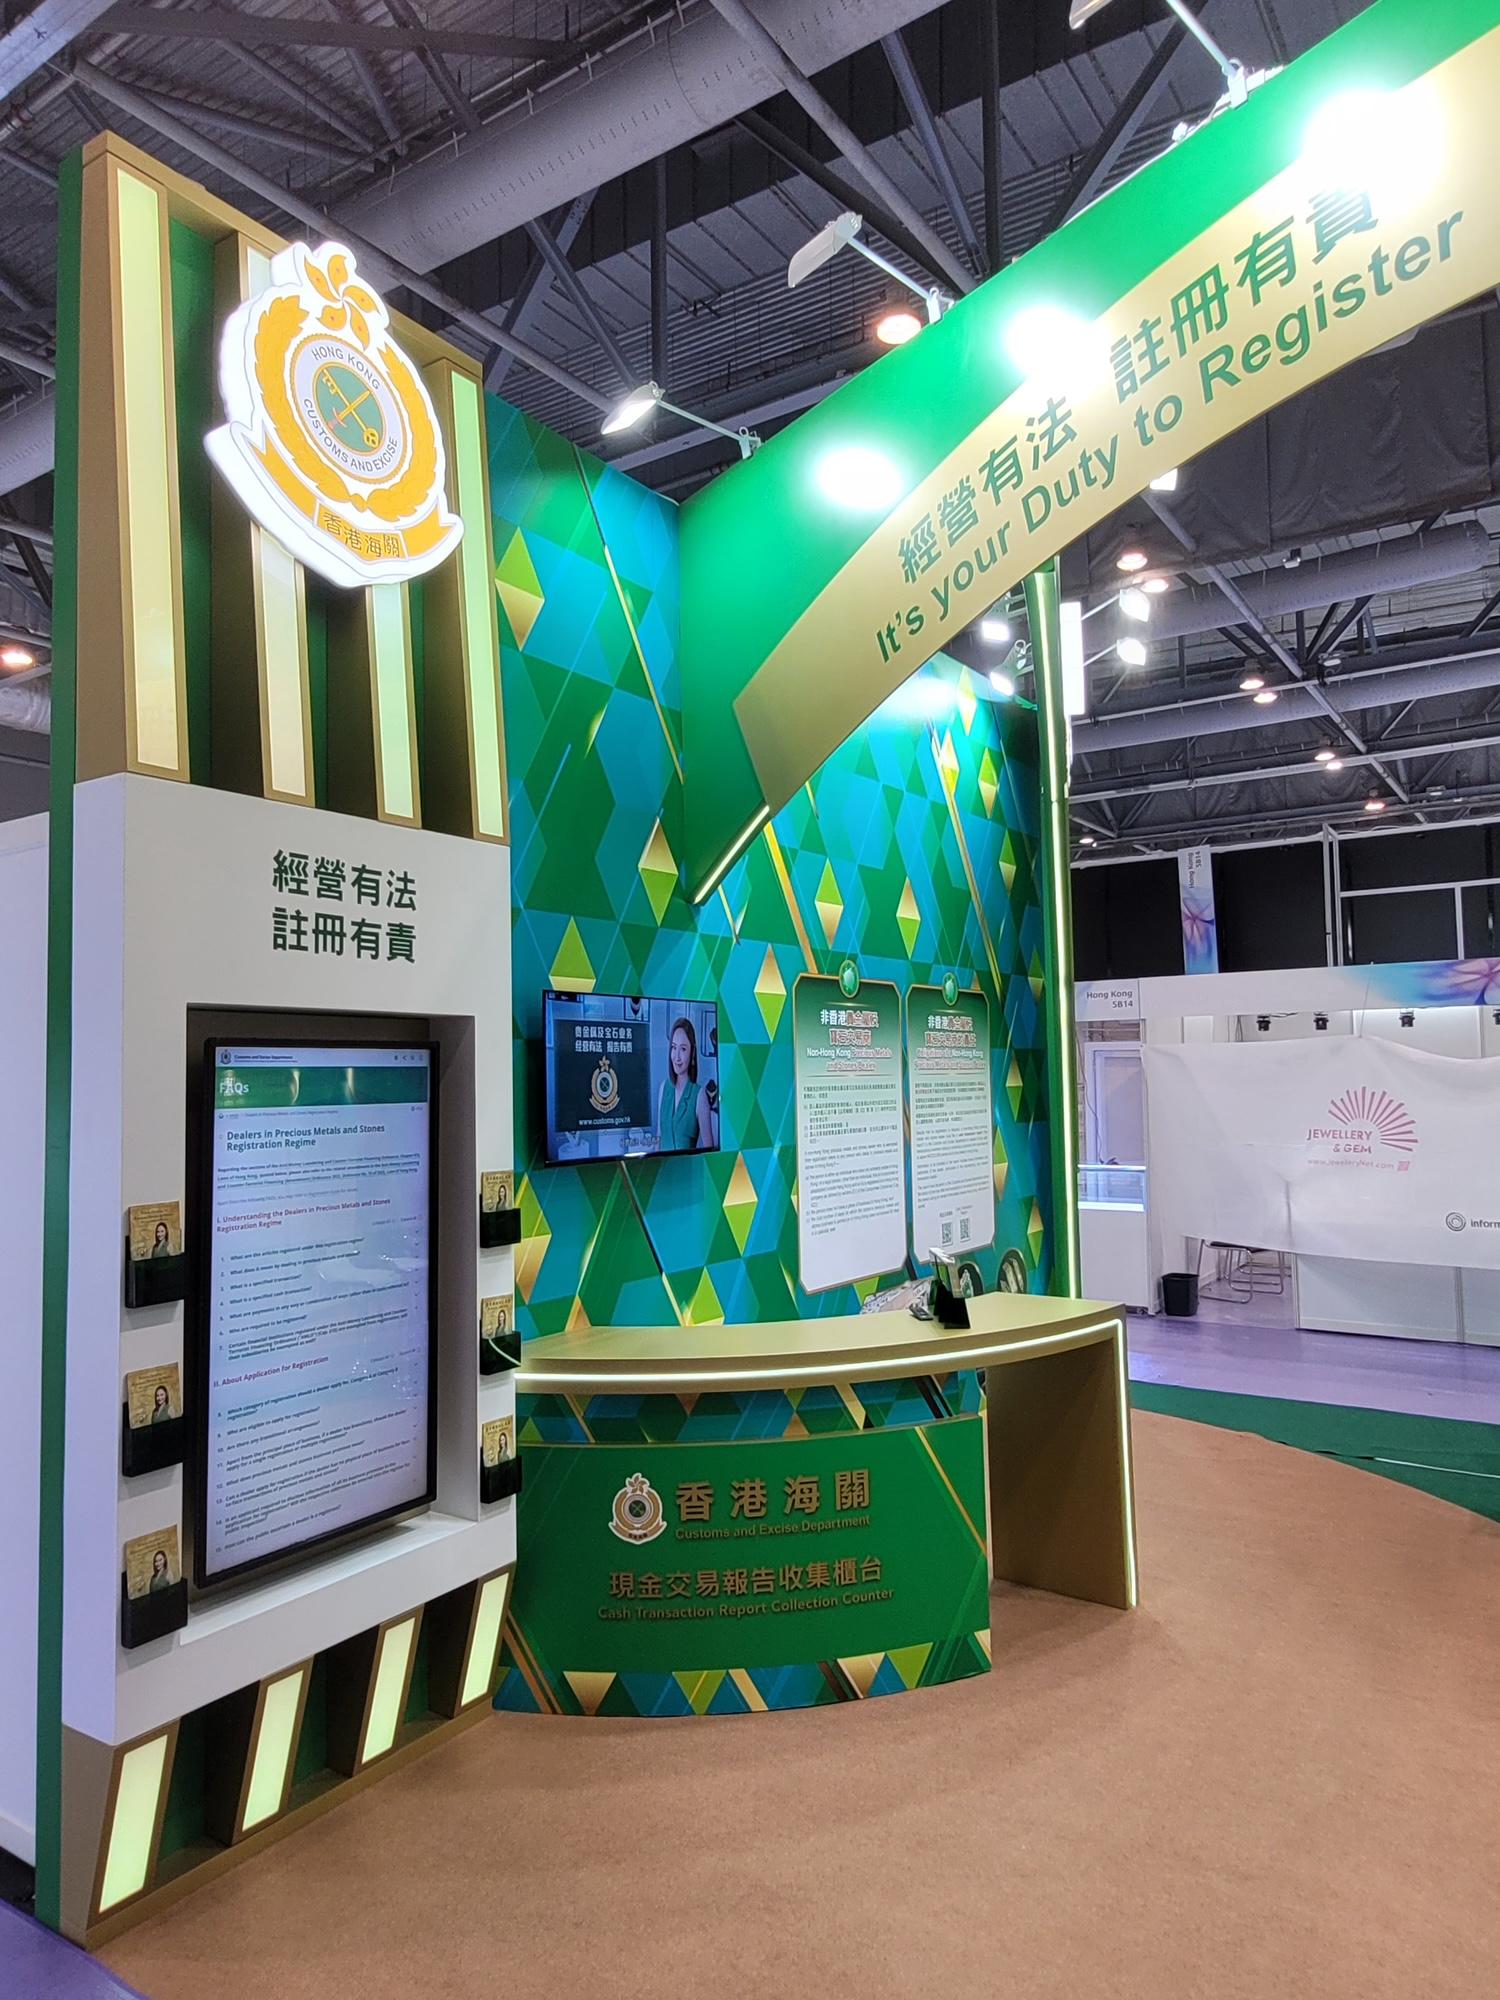 Hong Kong Customs will set up a booth at the Jewellery & Gem WORLD Hong Kong, to be held at the AsiaWorld-Expo, from tomorrow (September 18) for five consecutive days to publicise the Dealers in Precious Metals and Stones Regulatory Regime, and will provide on-site counter services to assist non-Hong Kong dealers in submitting a cash transaction report during their participation in the exhibition. Photo shows the Hong Kong Customs' booth.